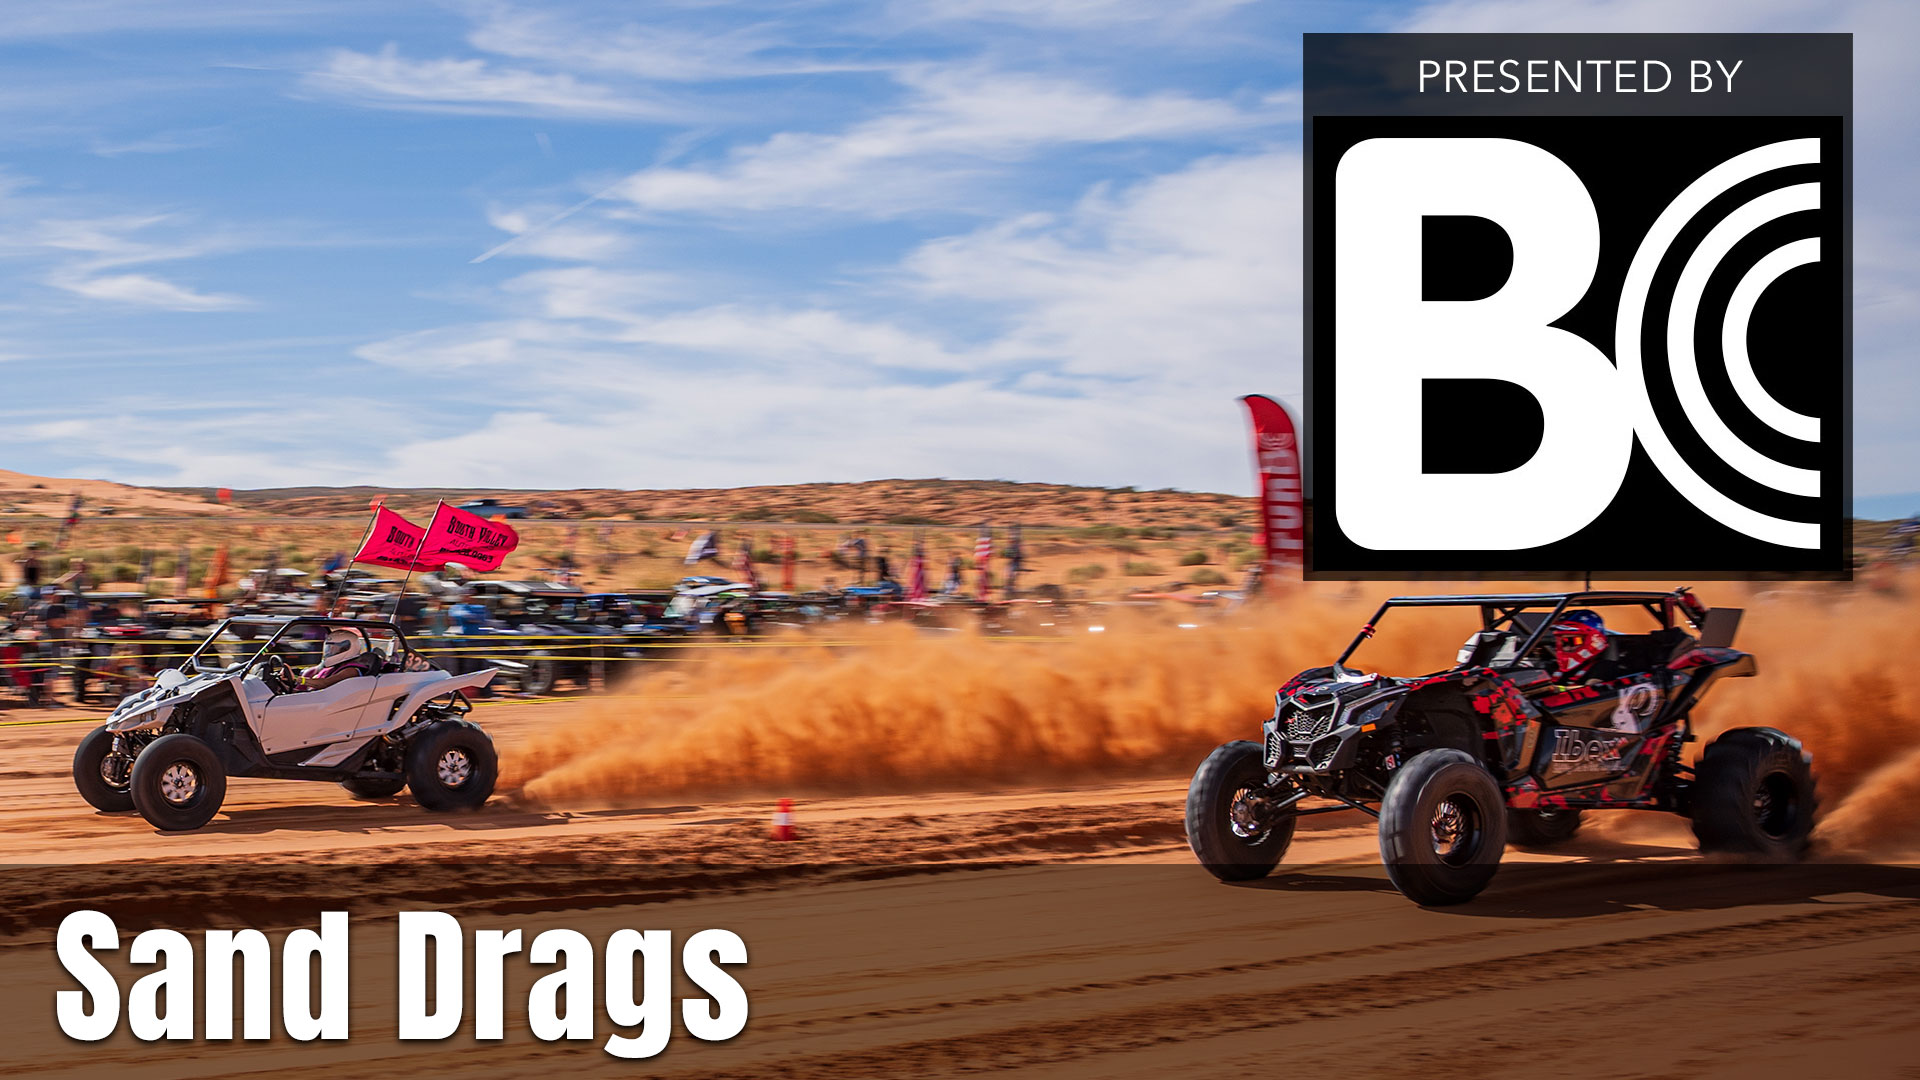 UTV Takeover Sand Drags presented by Brian Crower